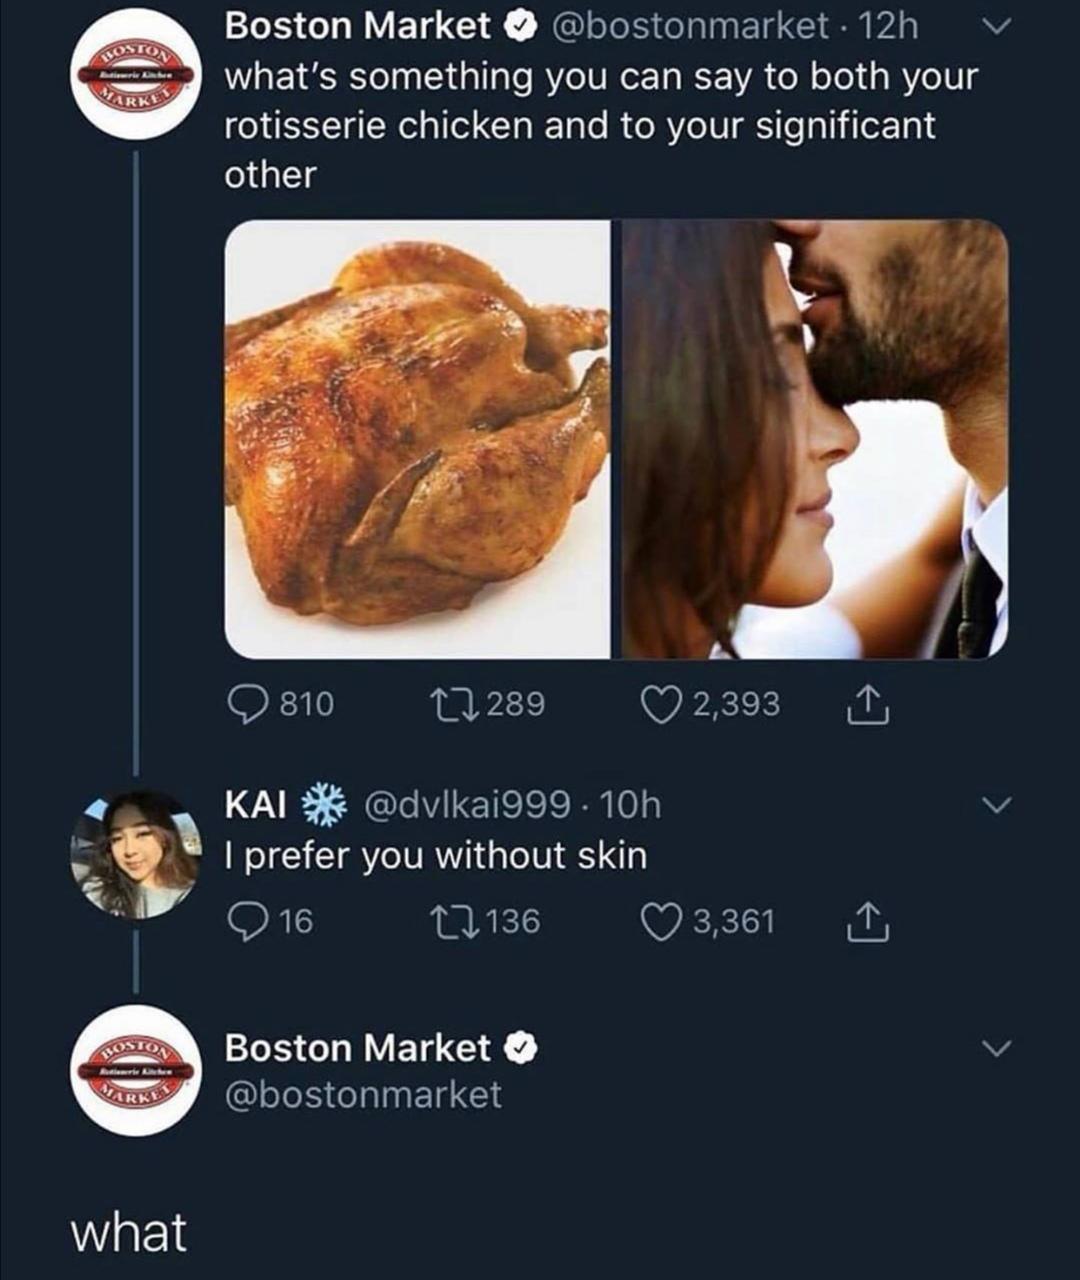 what's something you can say to rotisserie chicken and your significant other - Arke Boston Market . 12h what's something you can say to both your rotisserie chicken and to your significant other 810 22289 2,393 1 Kai . 10h I prefer you without skin 216 2